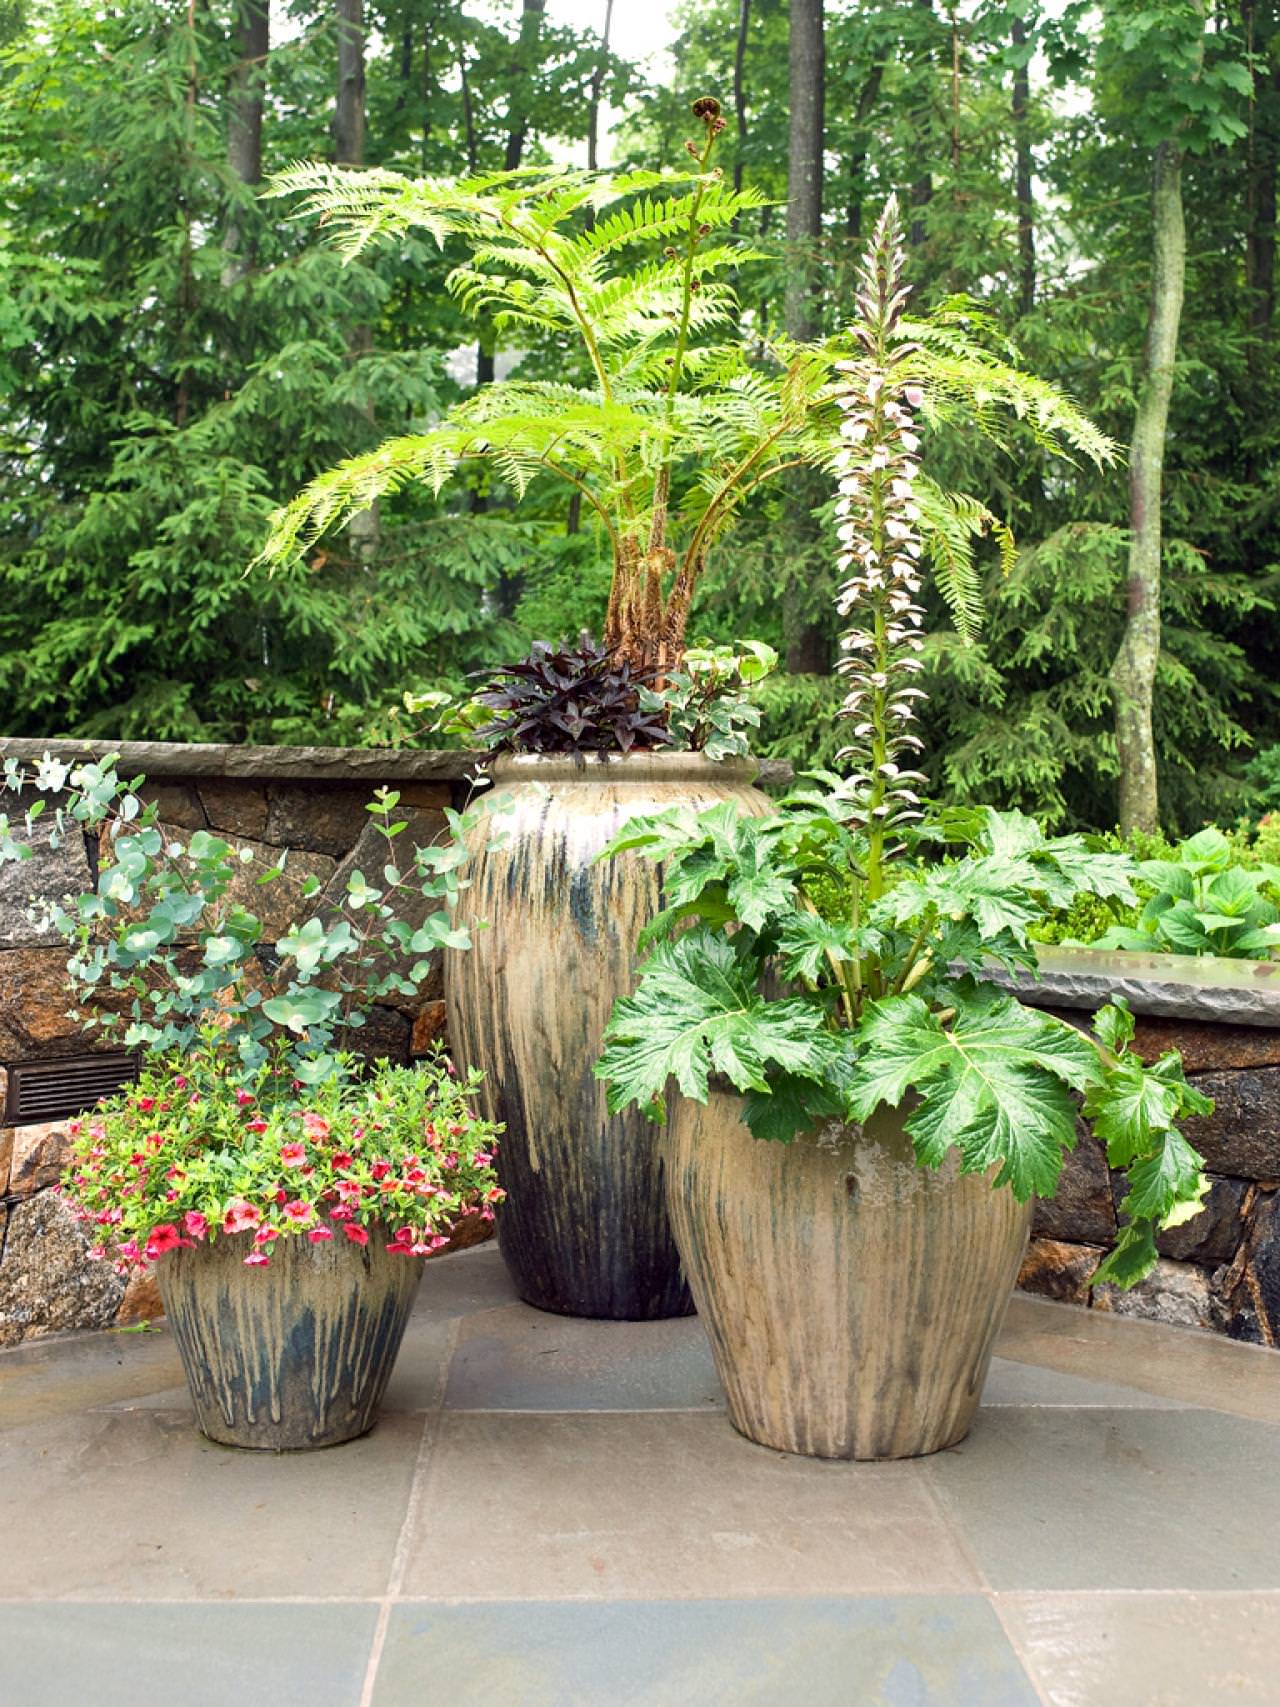 11 Most Essential Container Garden Design Tips | Designing a Container